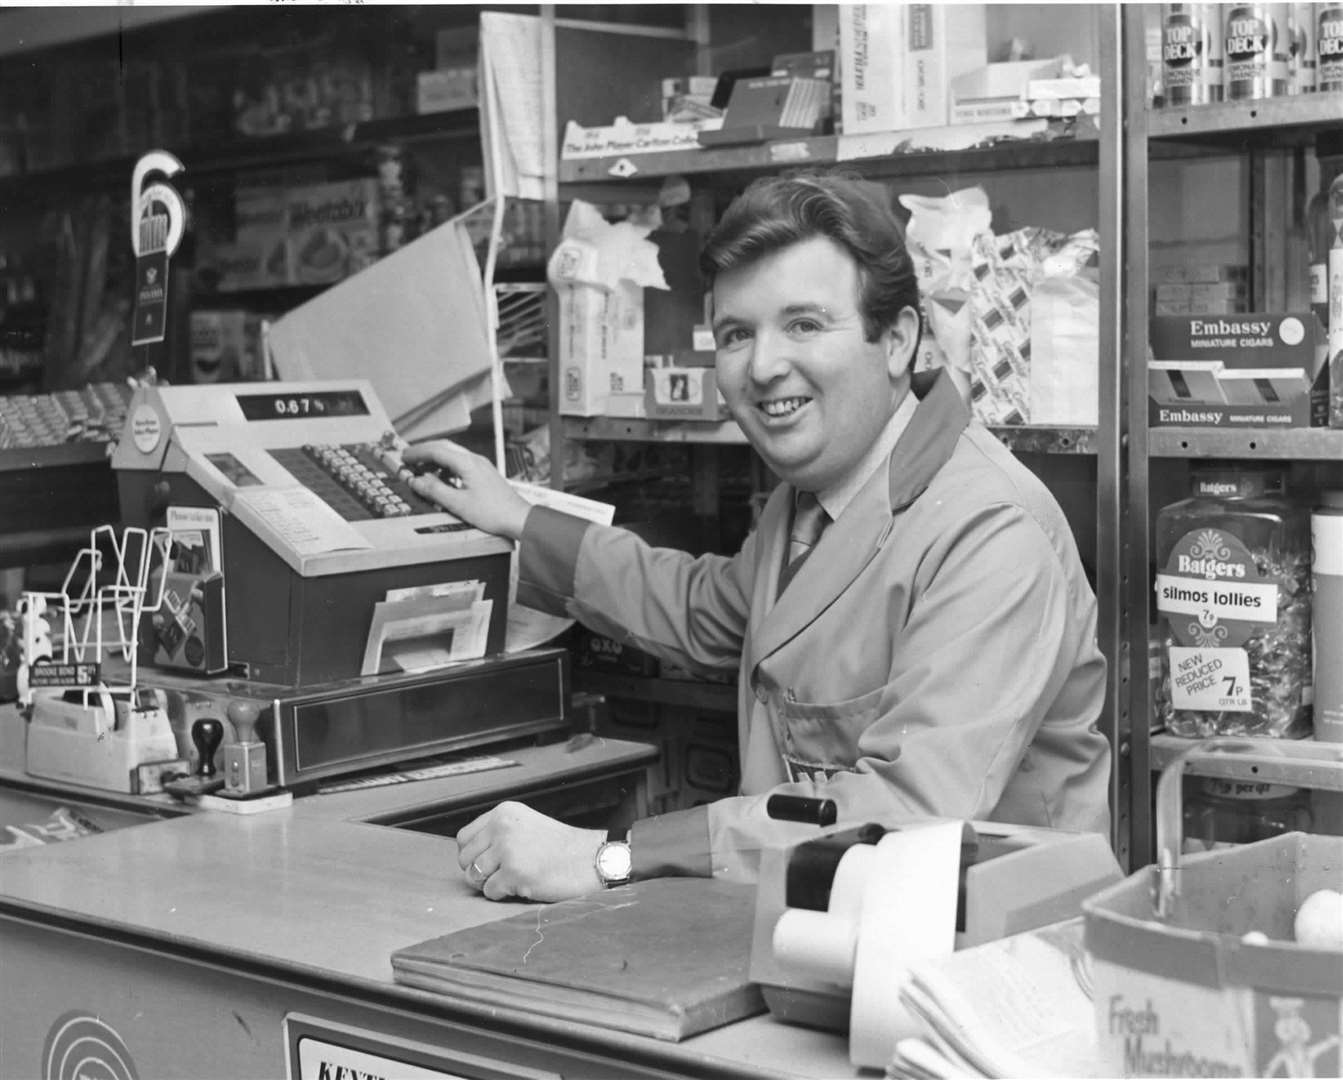 David Wood who ran the village shop and post office in Mersham in 1973